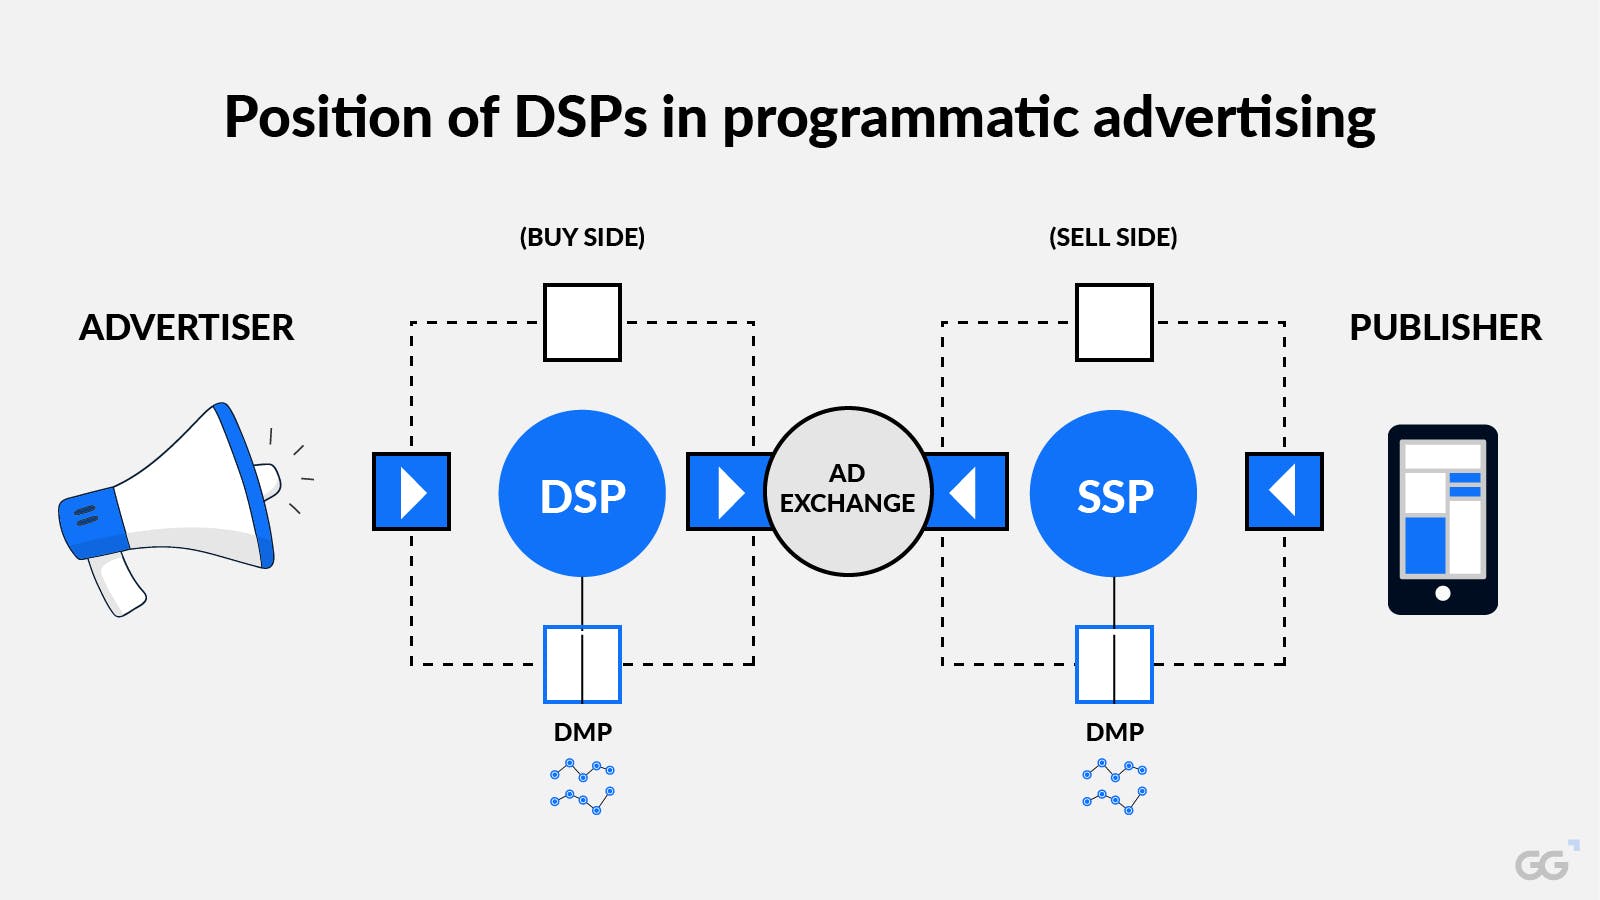 A diagram showing the role of DSPs (demand-side platforms) in programmatic advertising, situated between advertisers and publishers